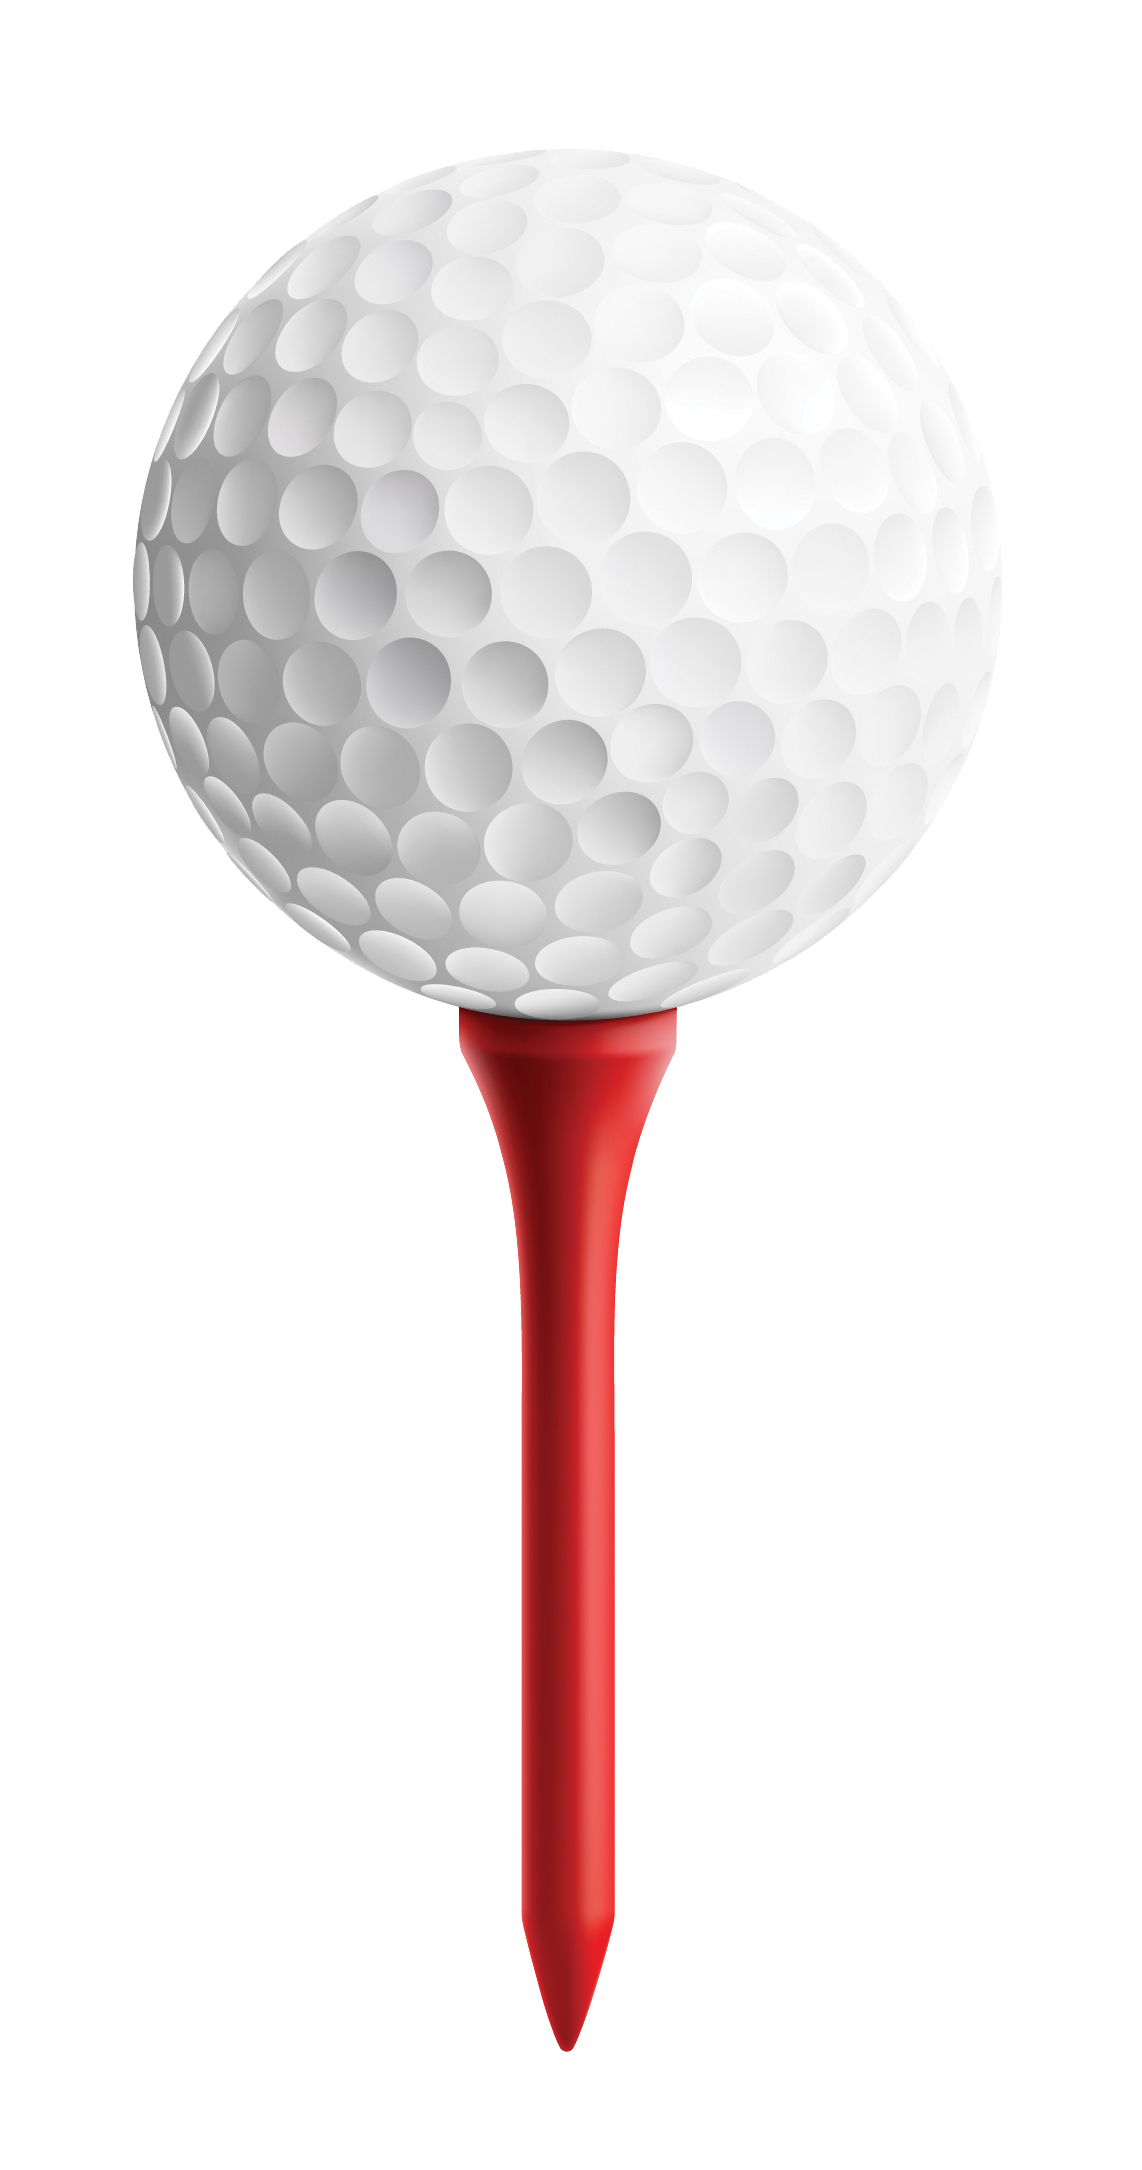 Images For > Golf Tee Clipart